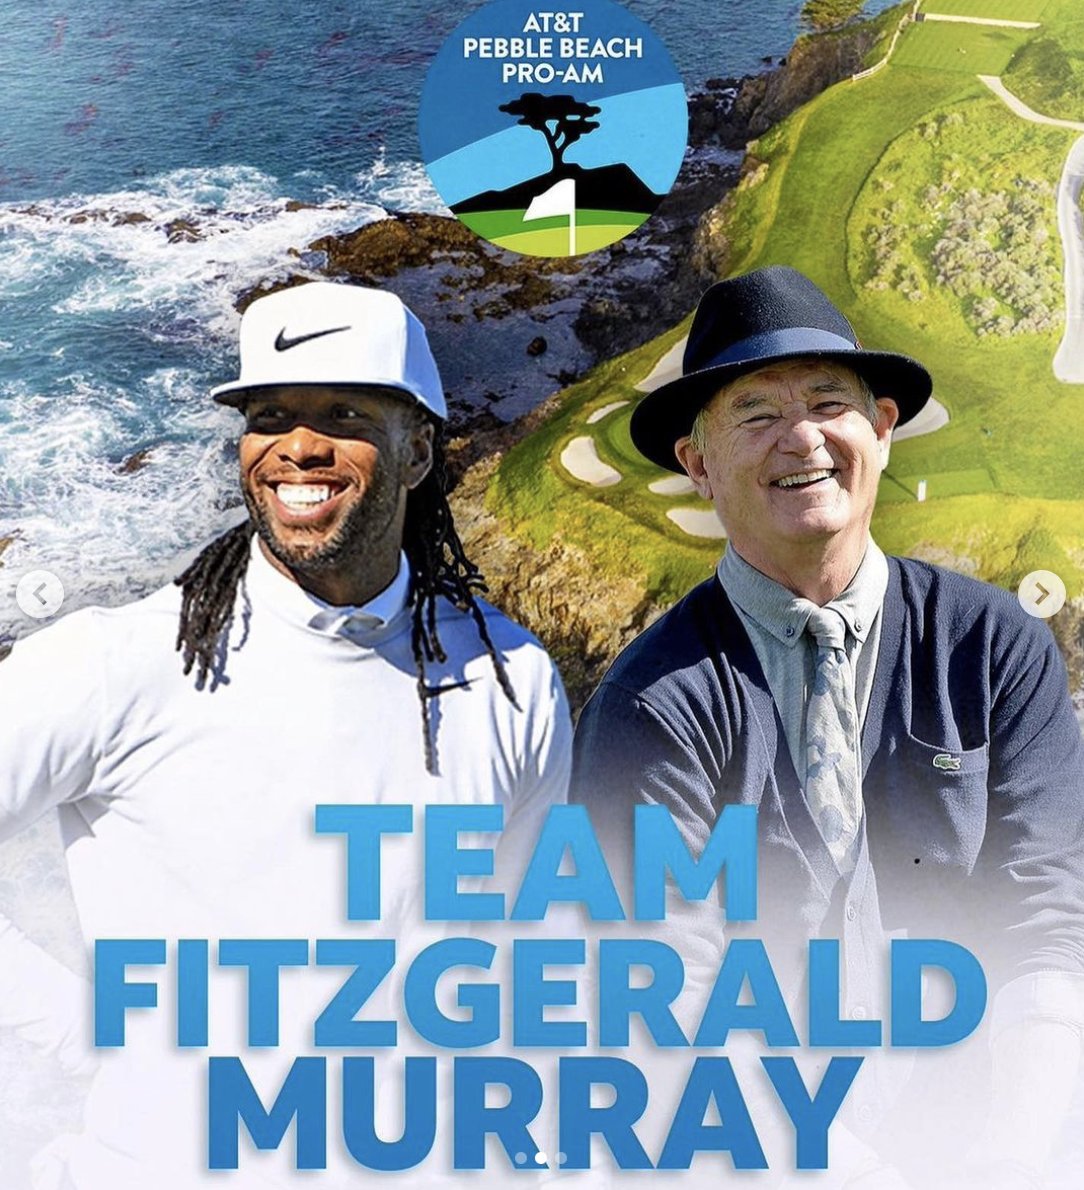 It’s not the @ATTProAm we were expecting, but it’s the one we got—and we’re going to make the most of it. #BillMurray and @LarryFitzgerald will tee it up educational inequities in a charity challenge. @GolfChannel will broadcast the five-hole event from 3pm-5pm PST—check it!